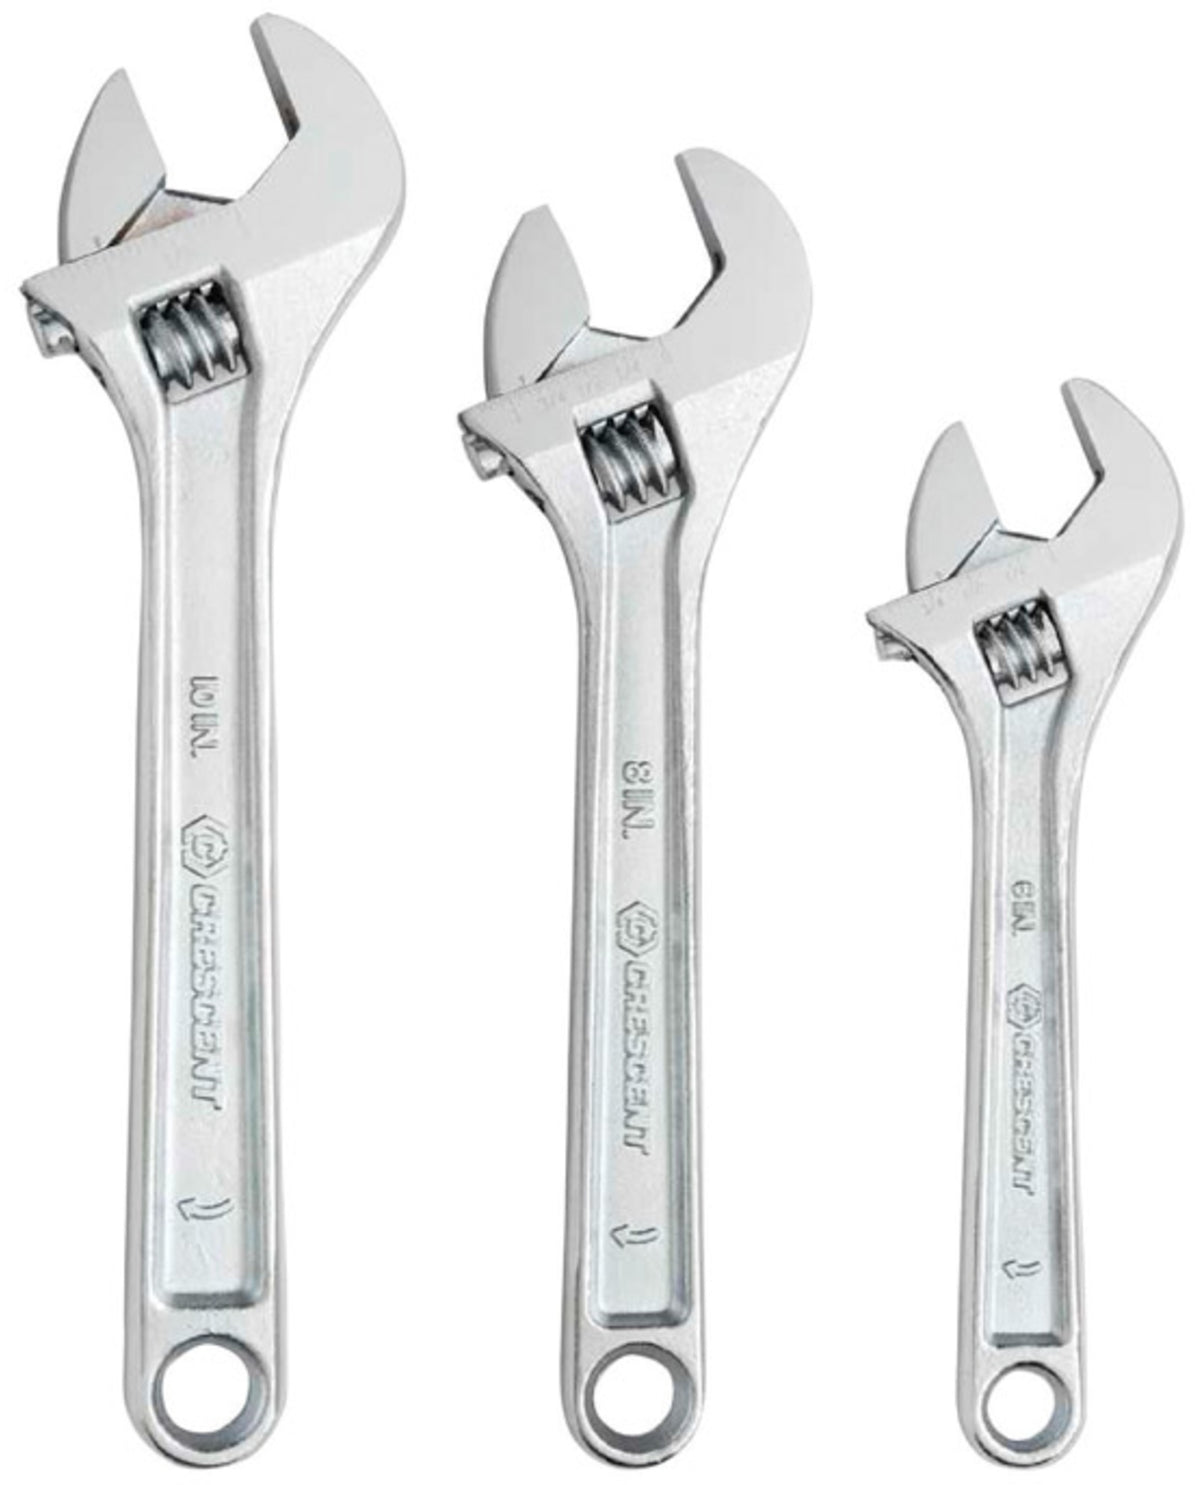 Crescent AC3PC Adjustable Wrench Set, Silver, 3 pc